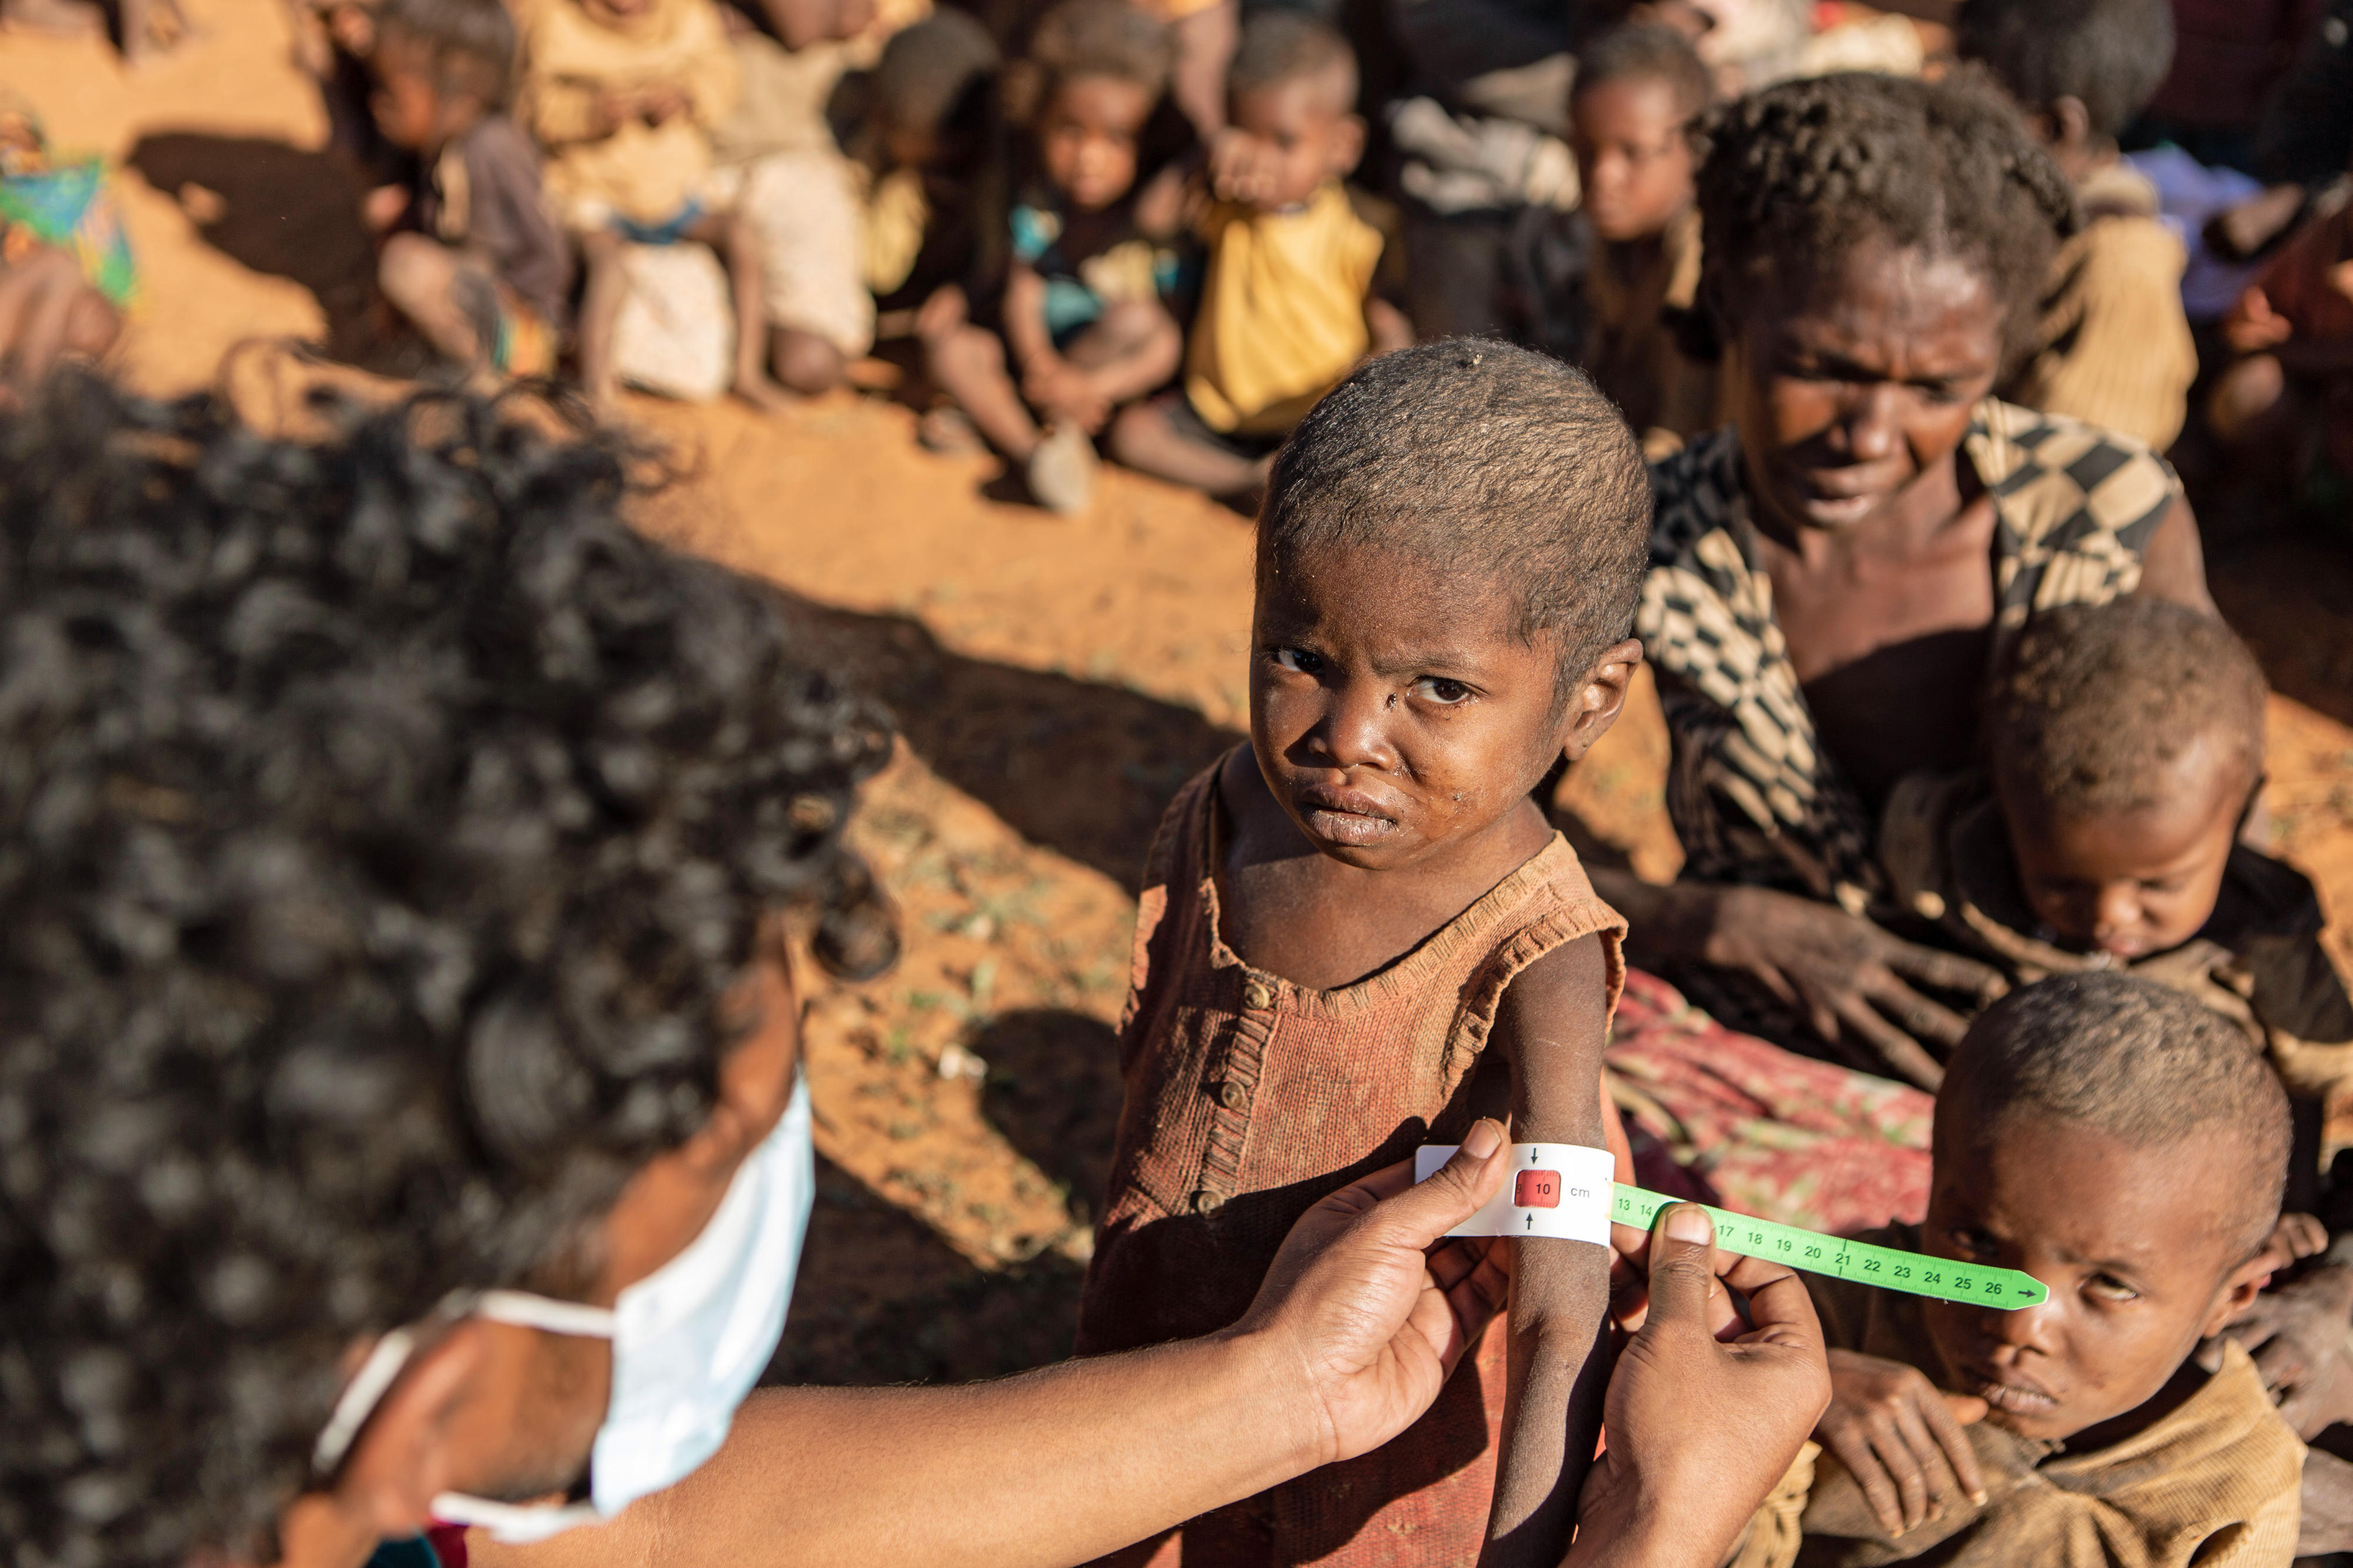 In Ambovombe, Madagascar, a World Food Programme worker uses a special measuring tape to determine the level of malnutrition in four-year-old Retoboha.